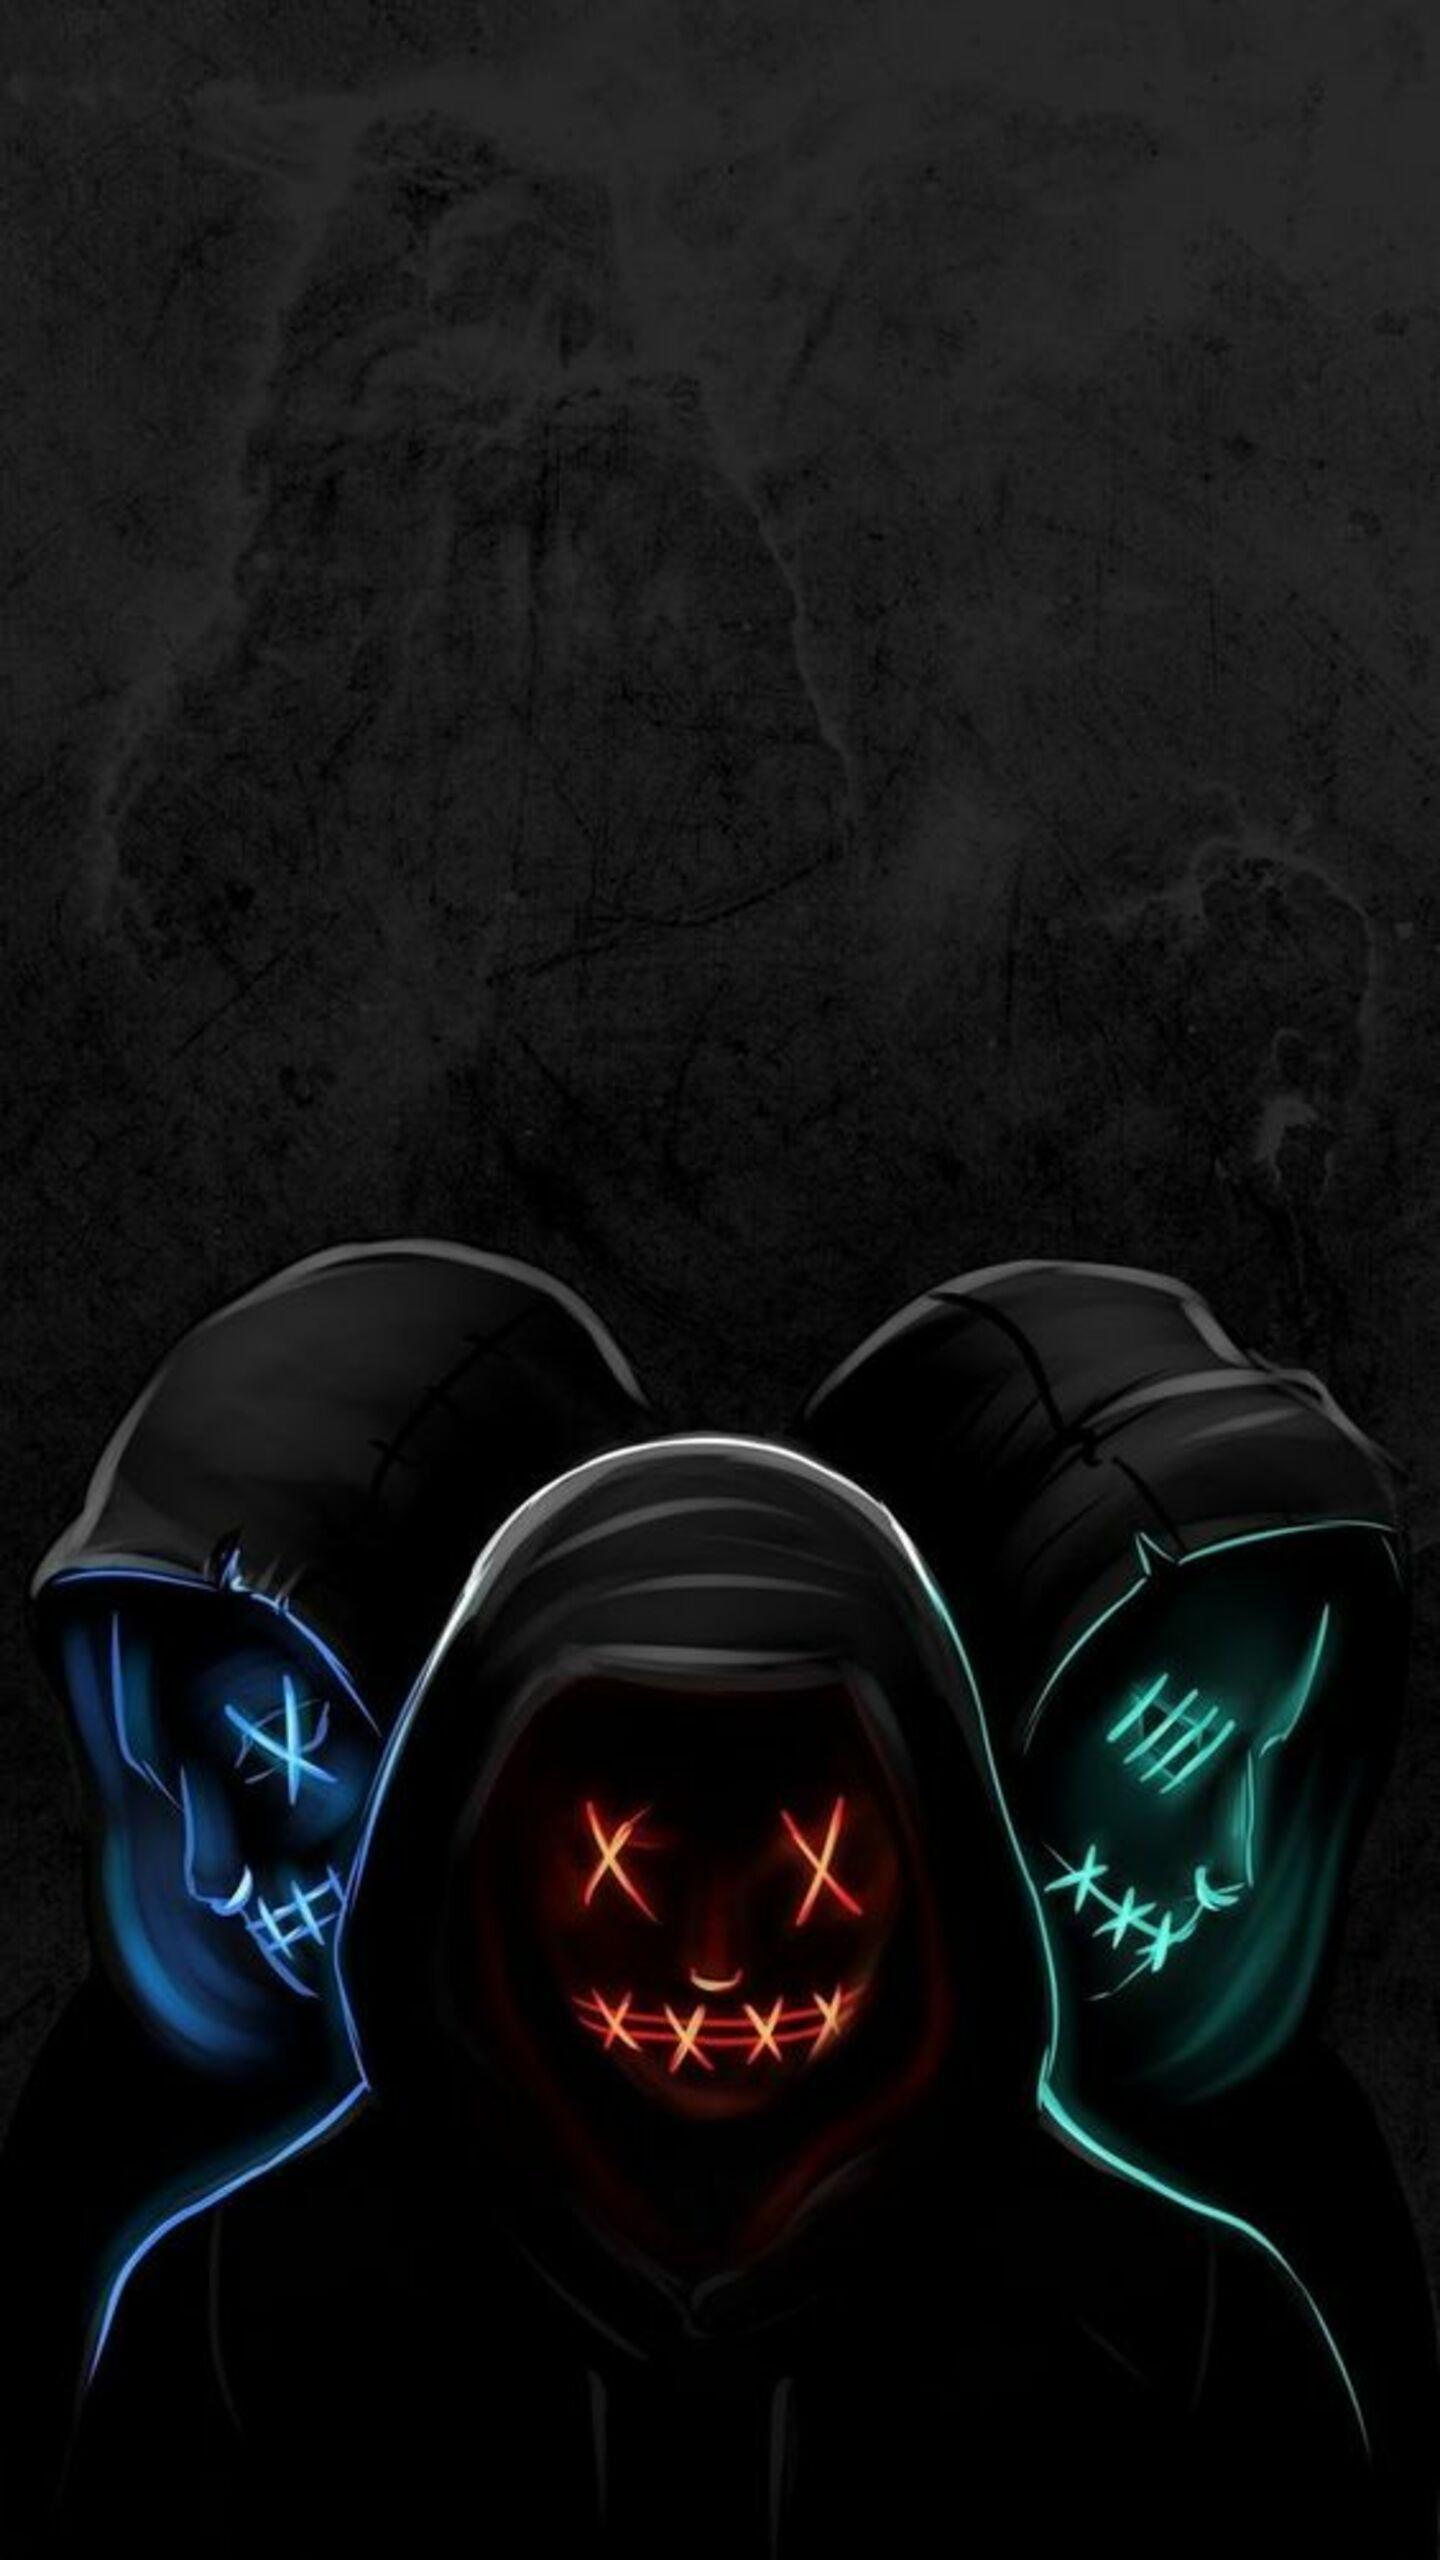 Led Purge Mask Wallpaper Hd For Android Apk Download - purge mask roblox